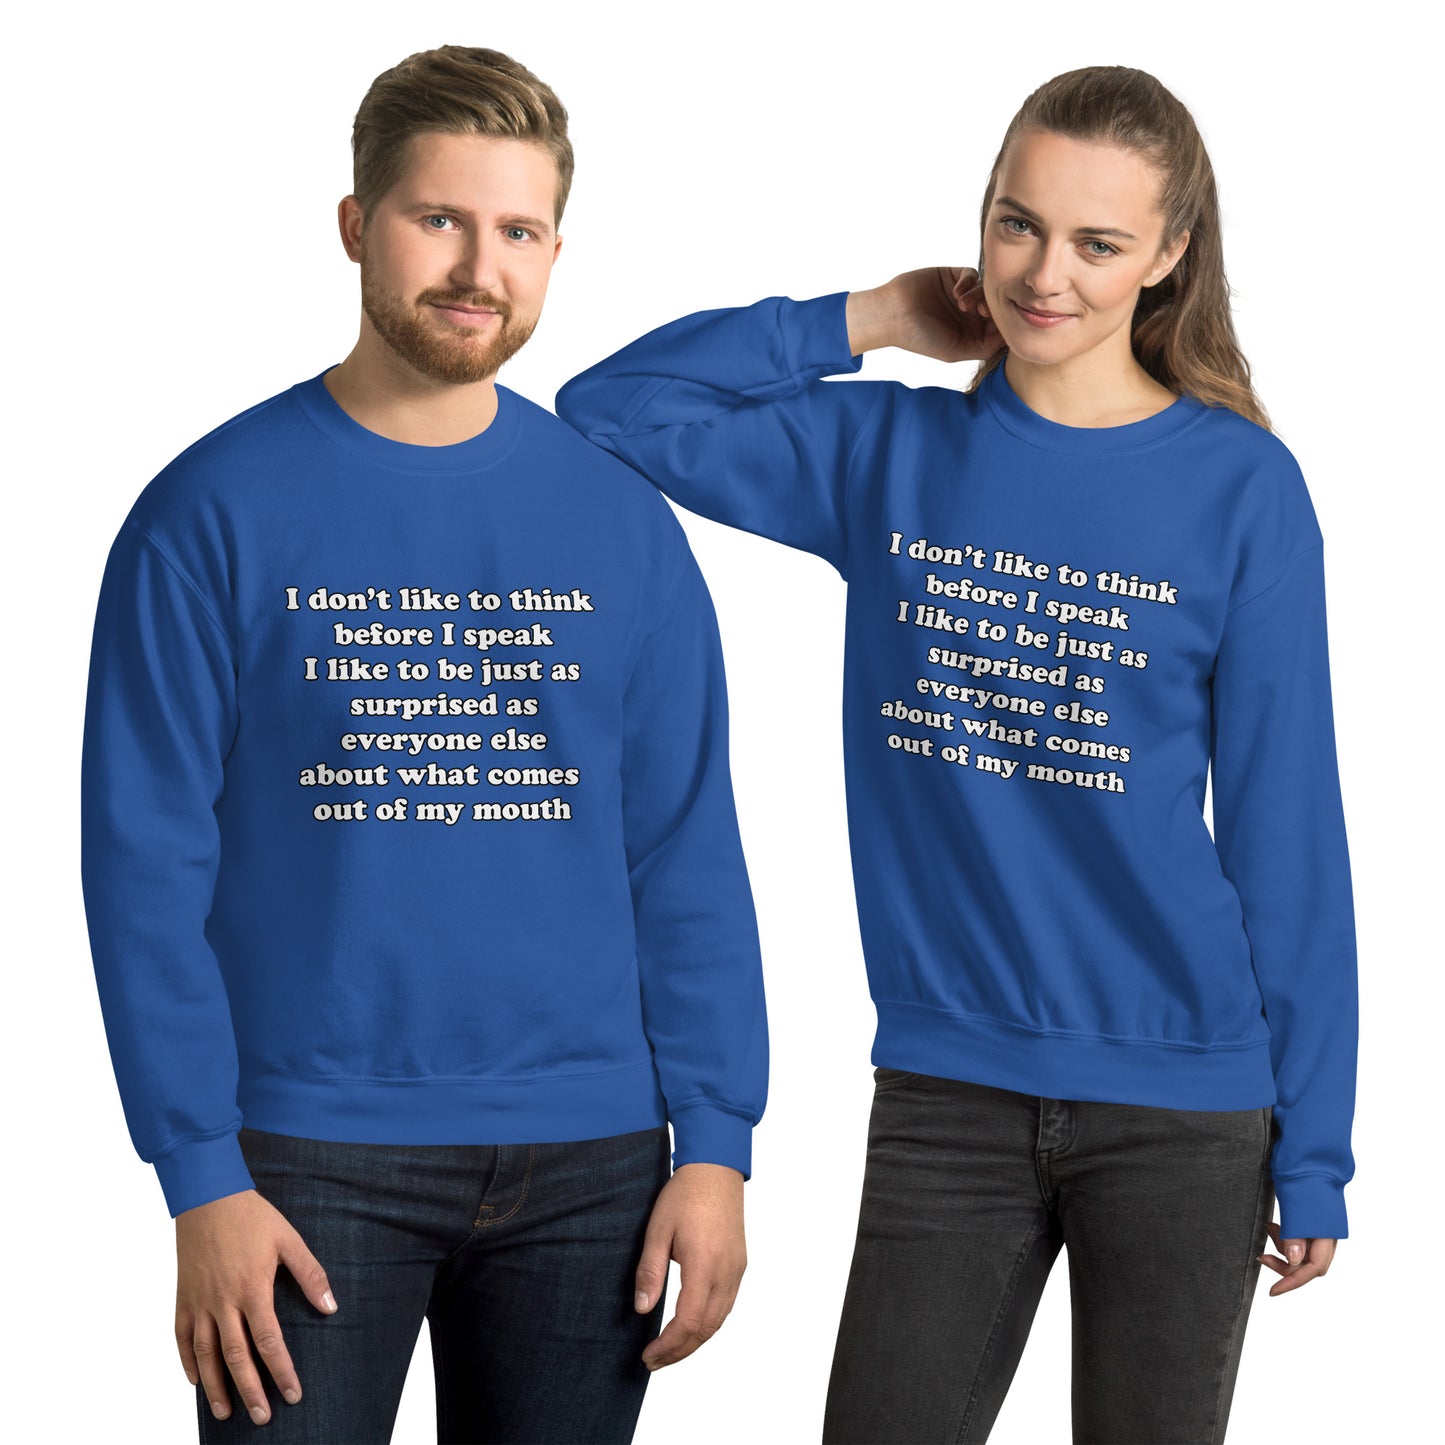 Man and woman with royal blue sweatshirt with text “I don't think before I speak Just as serprised as everyone about what comes out of my mouth"